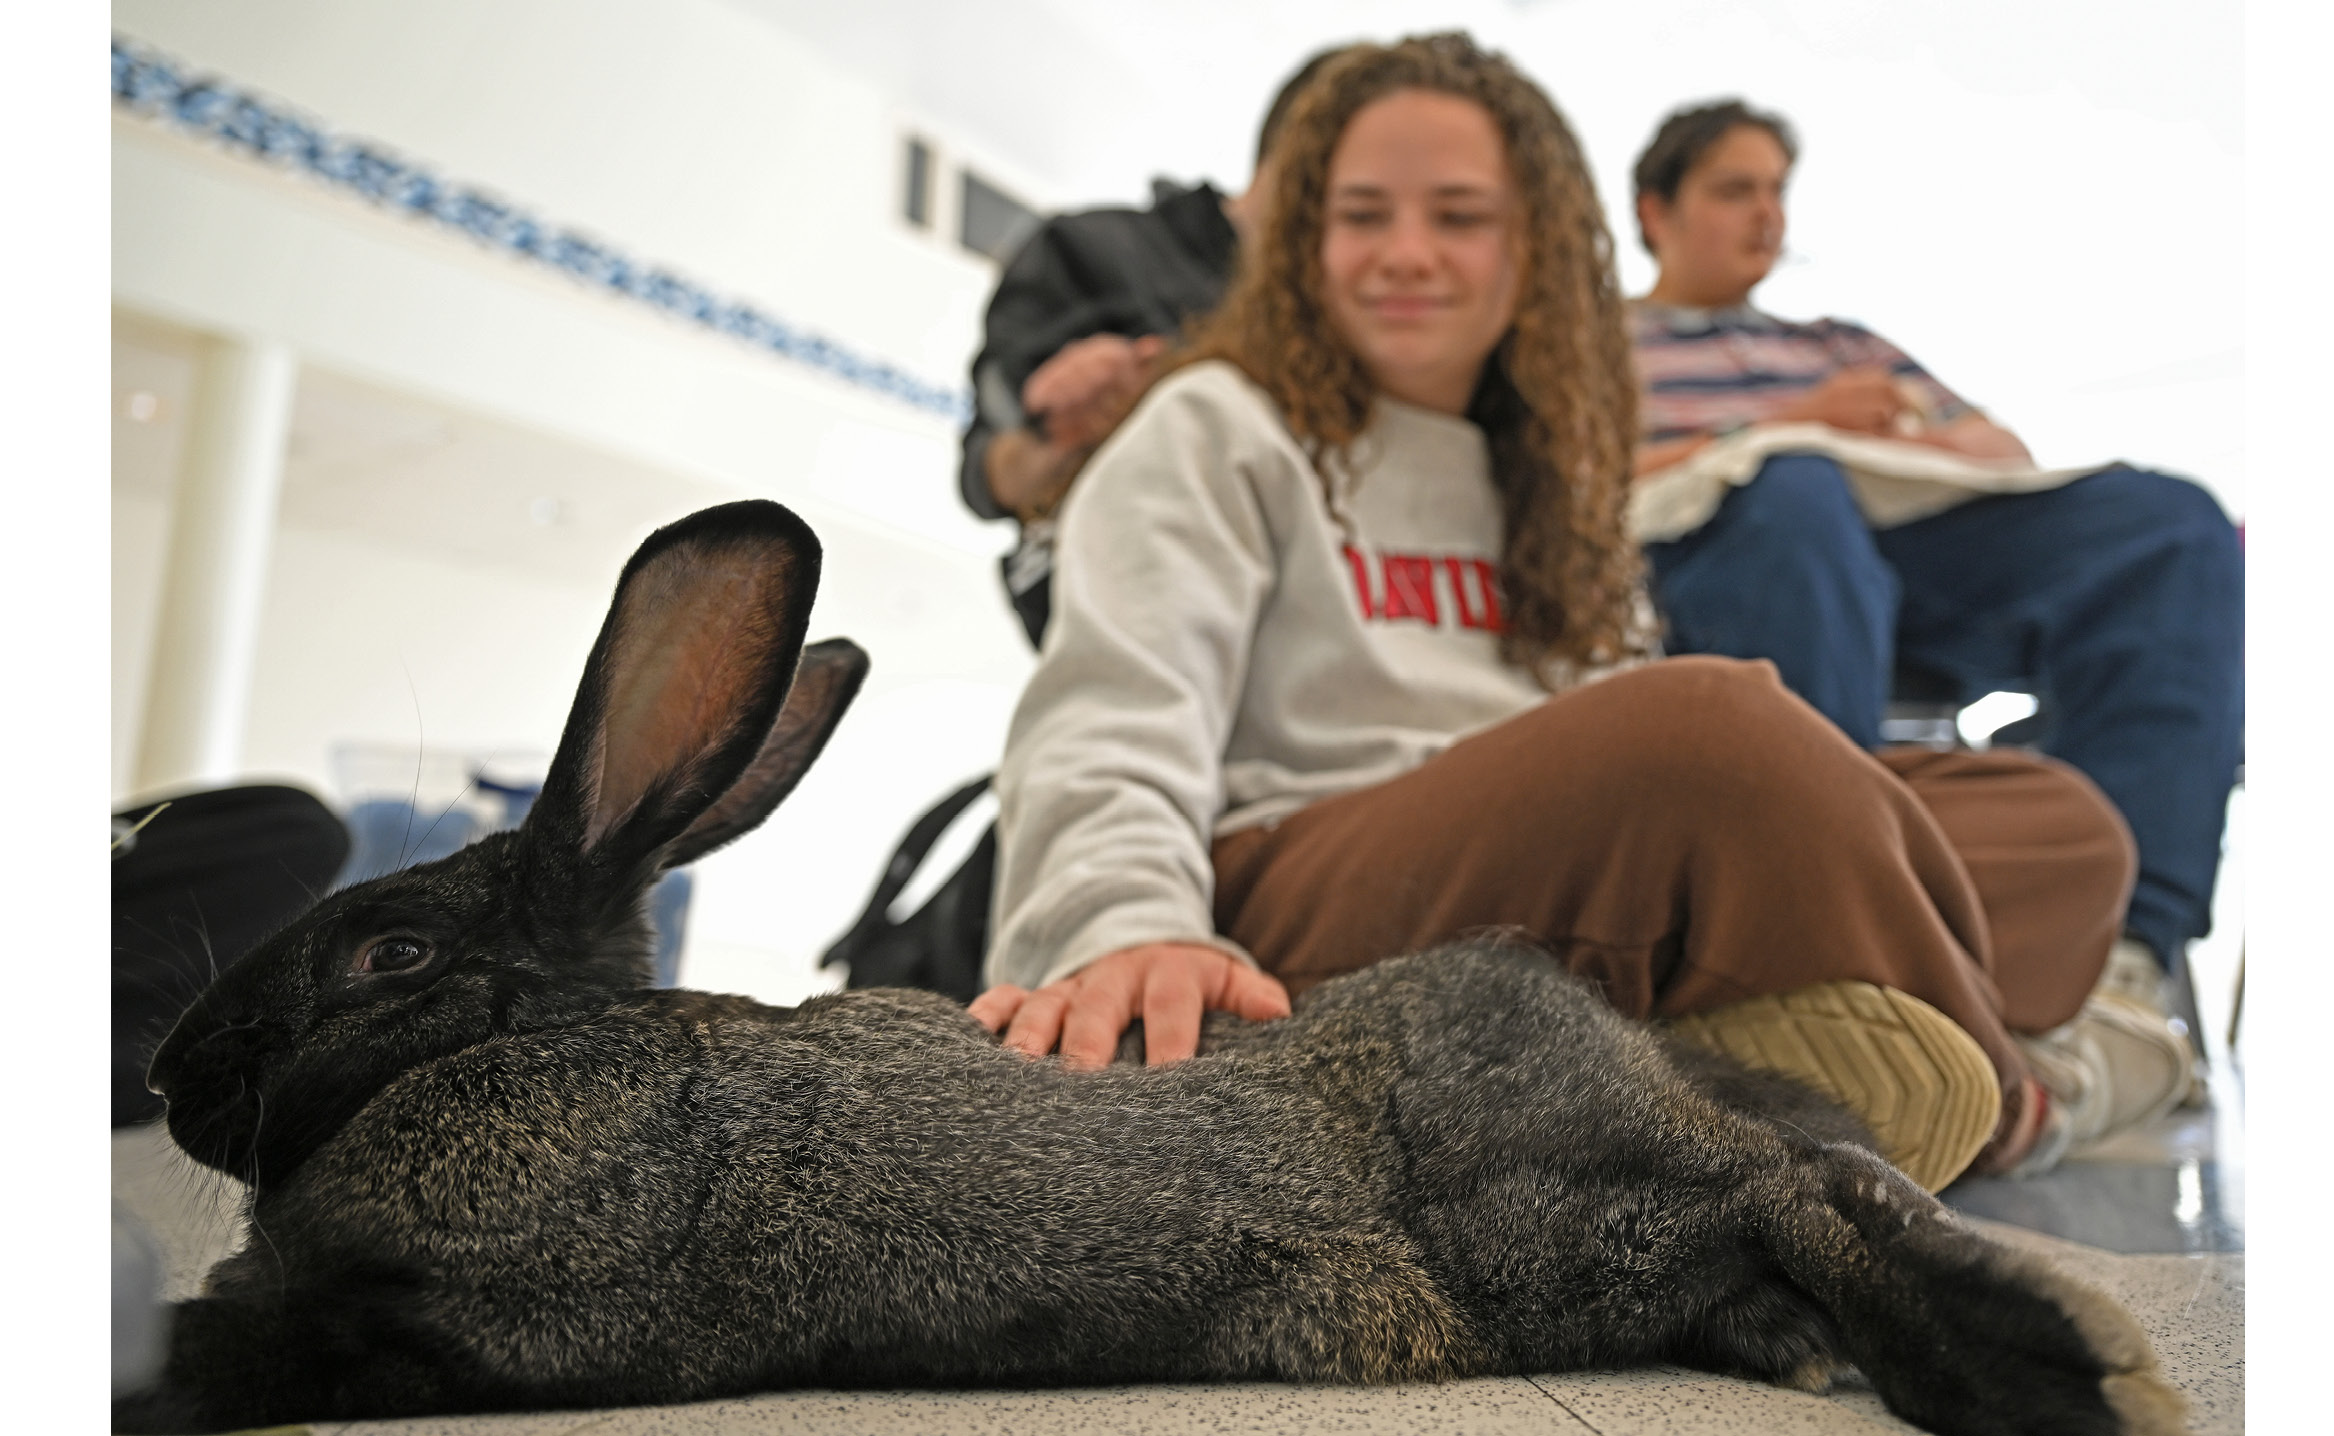 Students play with animals on campus to de-stress at a petting zoo from Warm and Fuzzy Animal Adventures Wednesday, April 19, 202